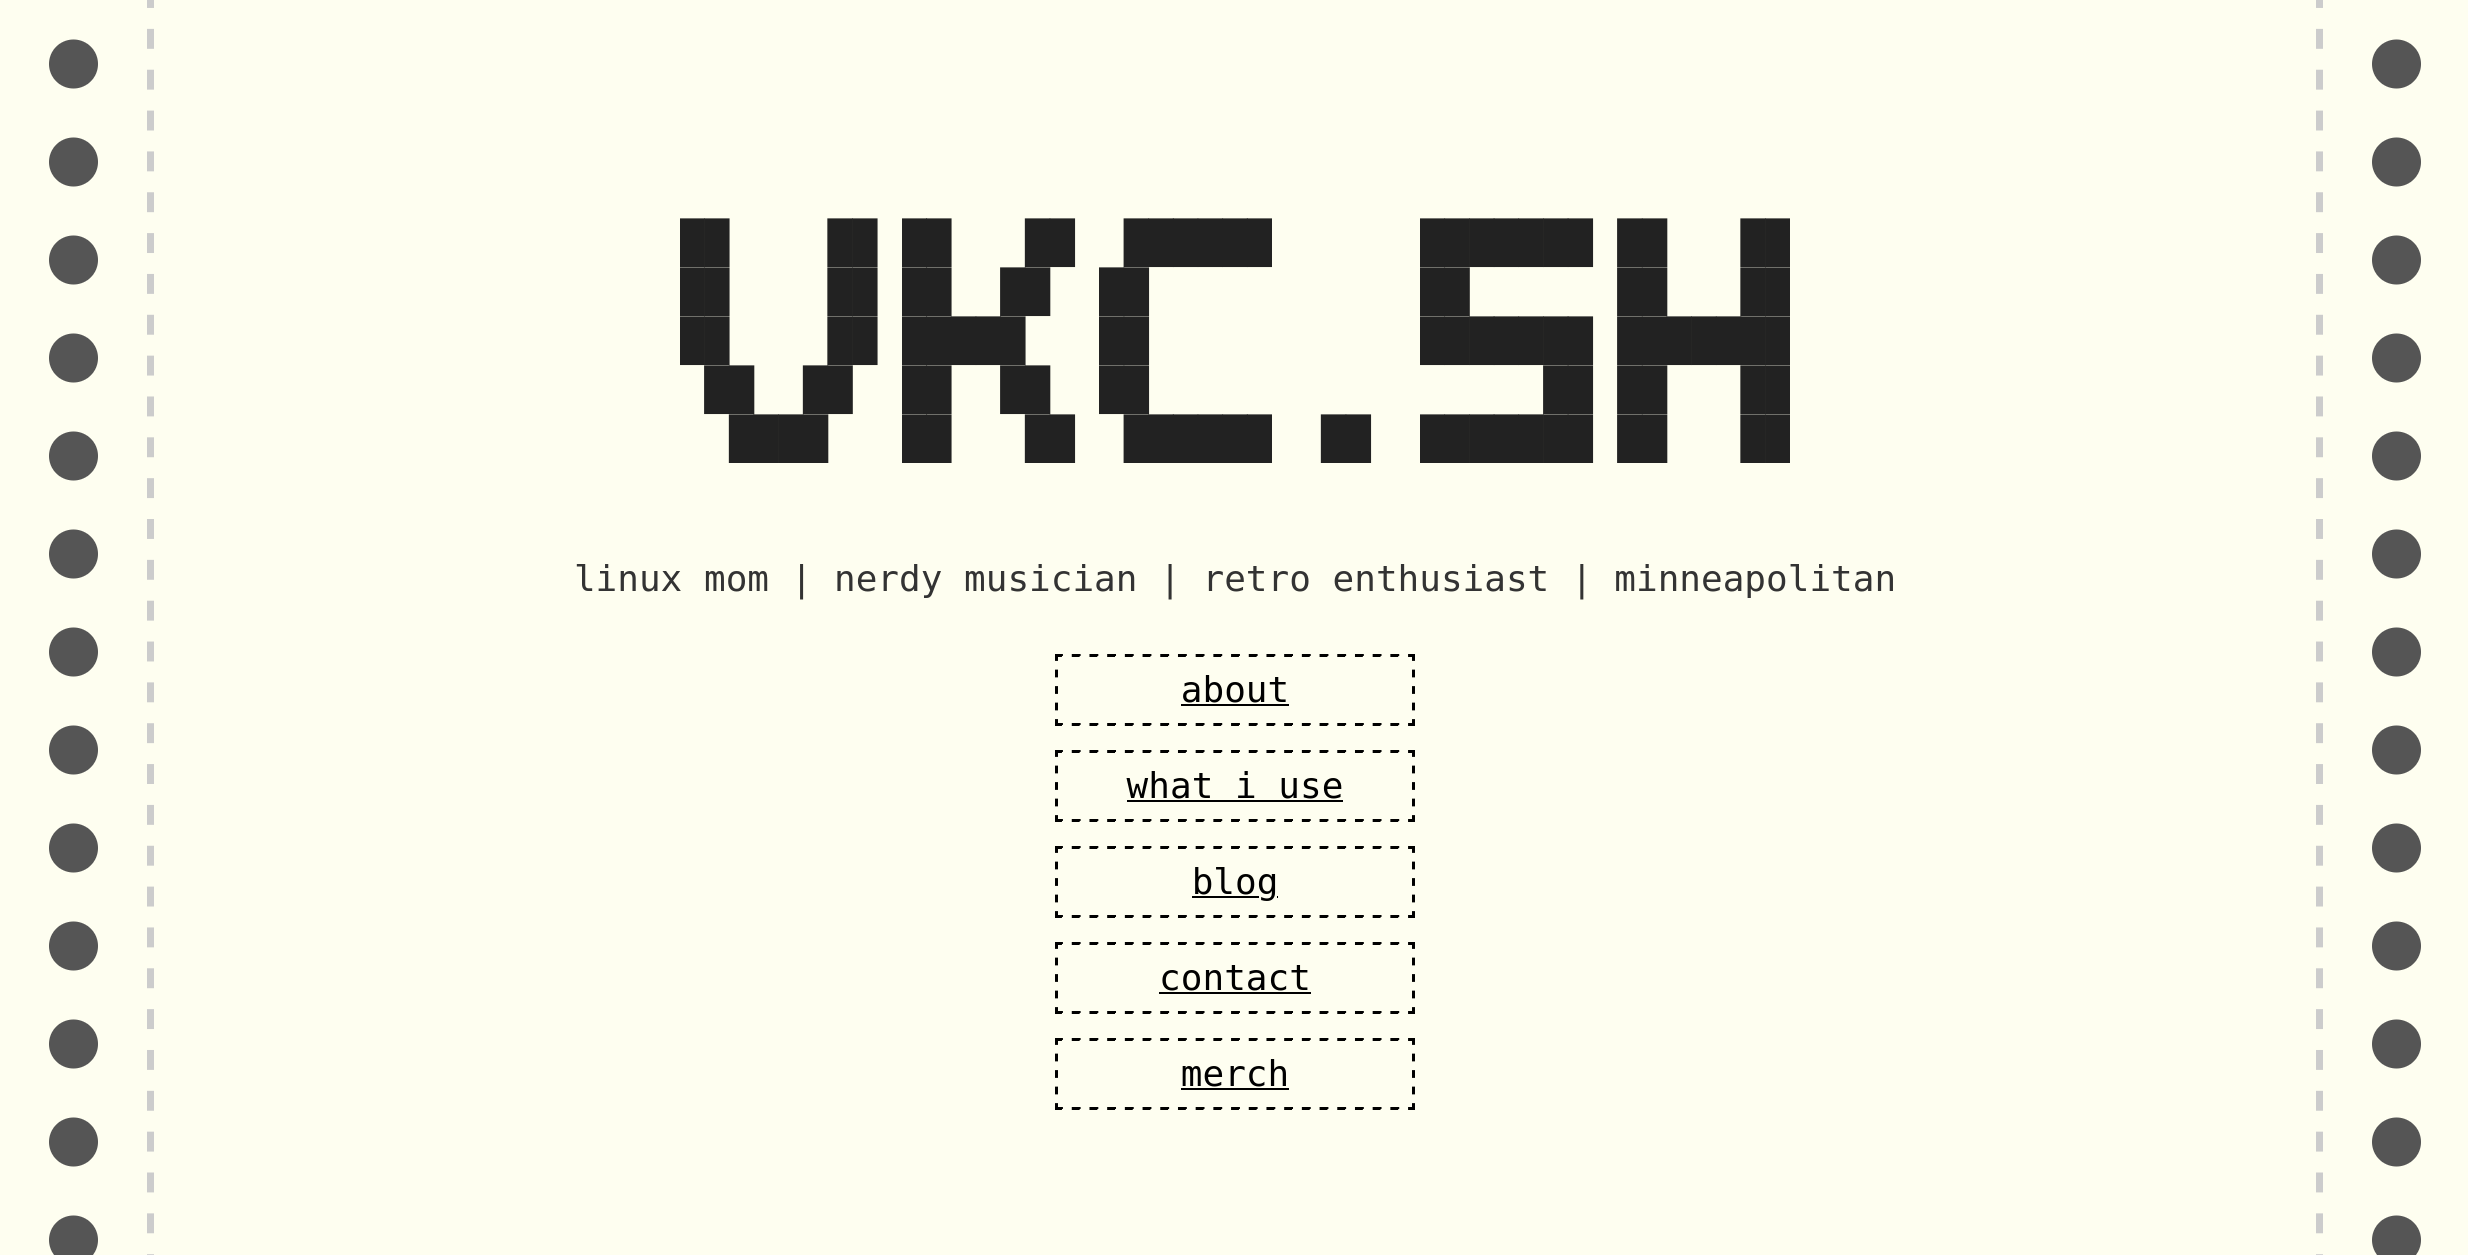 An HTML/CSS rendering of a dot matrix piece of paper, with the letters "VKC.SH" faux-printed in ASCII-art style, and the various links you can click on inside the page.